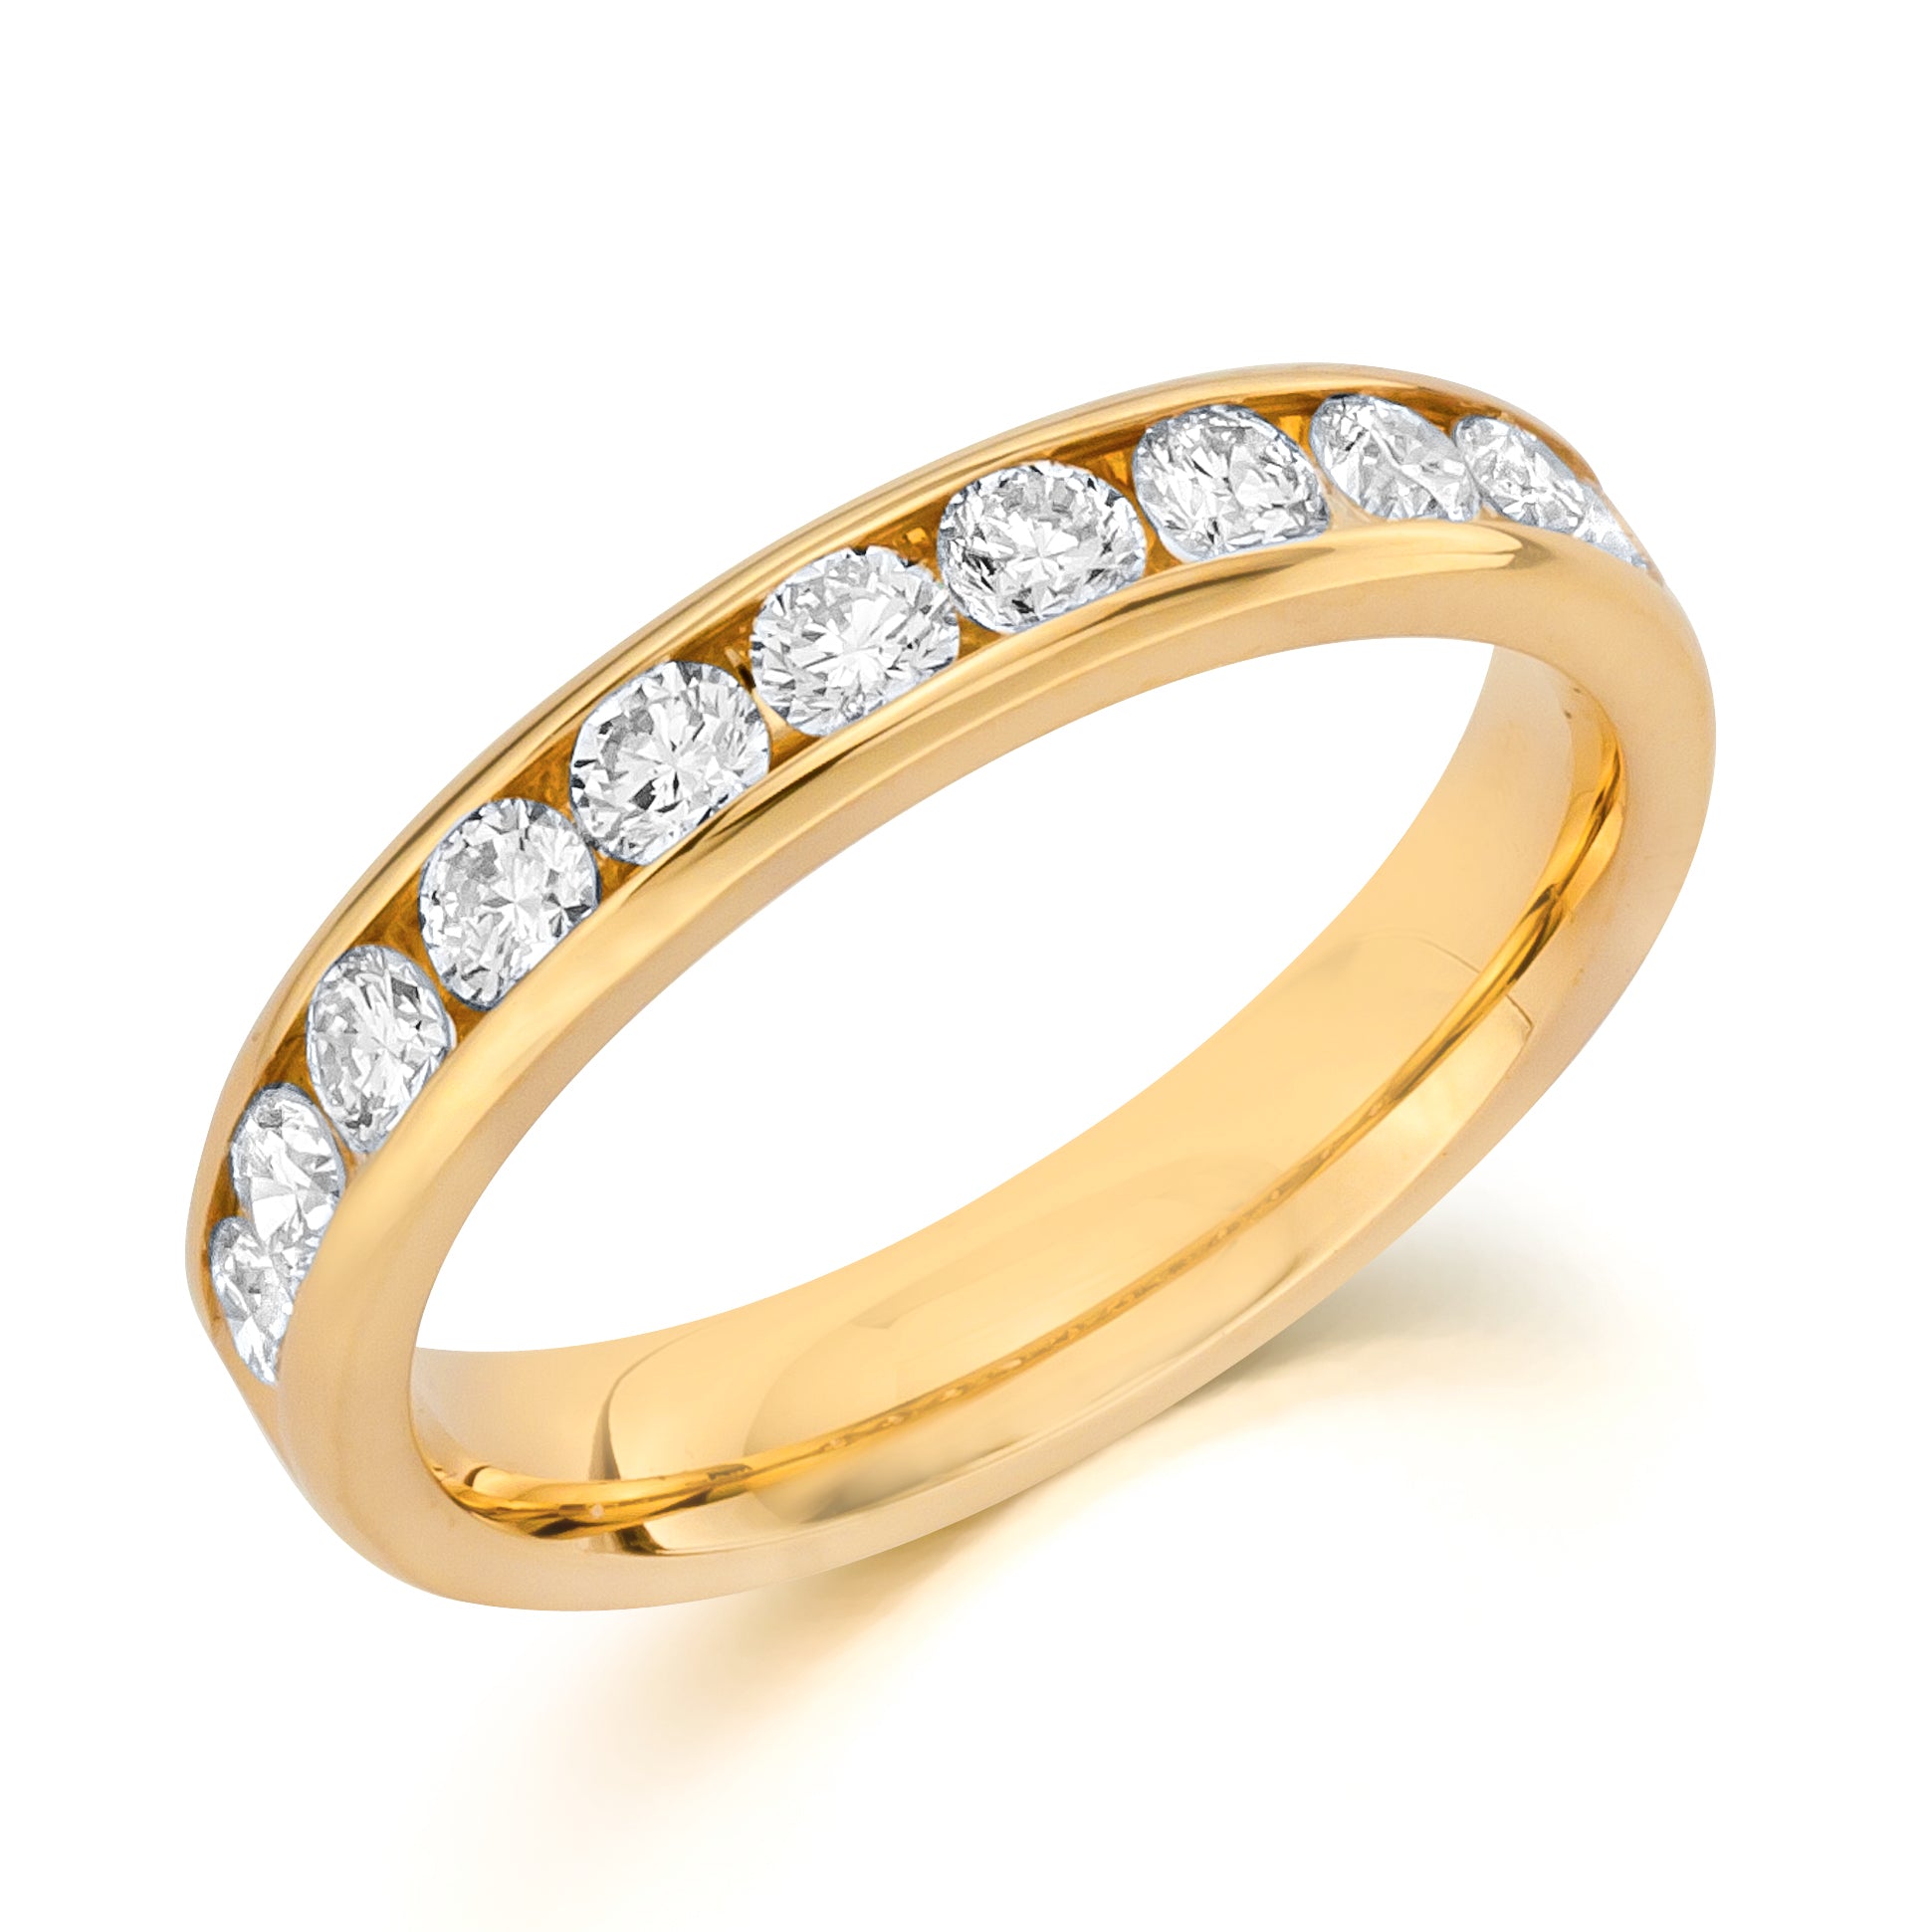 14K Yellow Gold Channel Set Diamond Anniversary Ring - Just Perfect